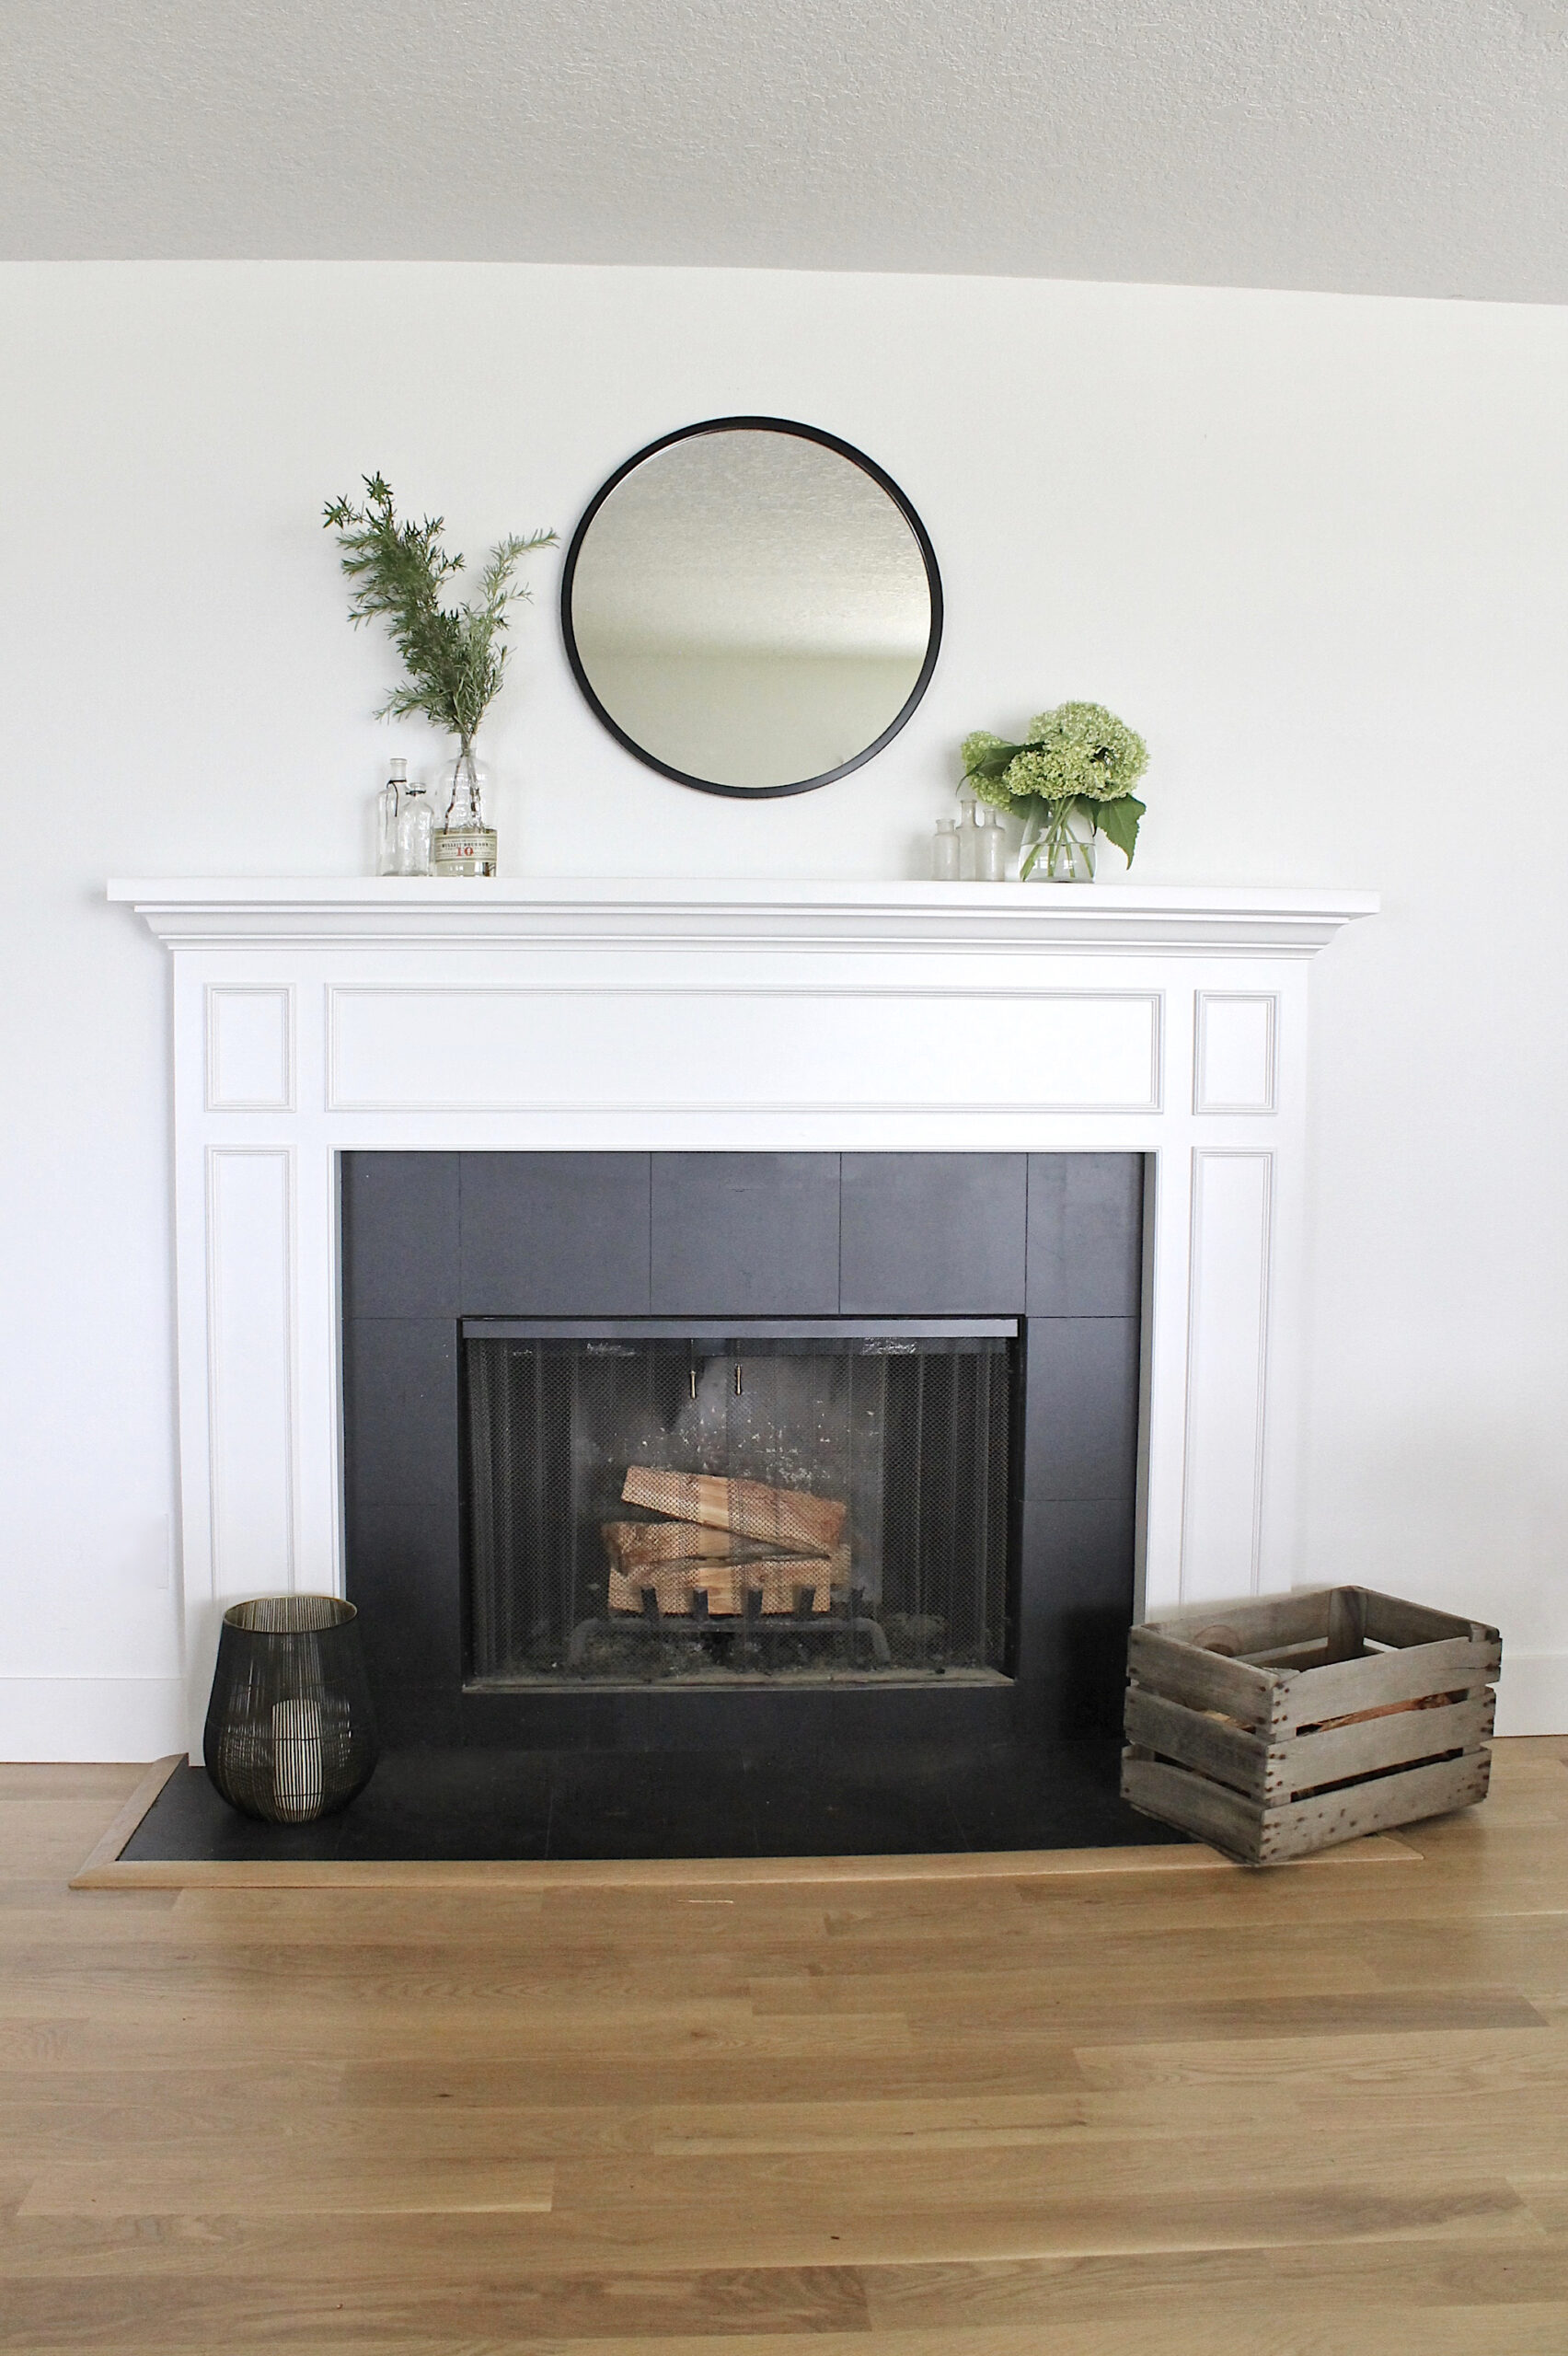 How To Paint A Ceramic Tile Fireplace, Paint Ceramic Tile Around Fireplace